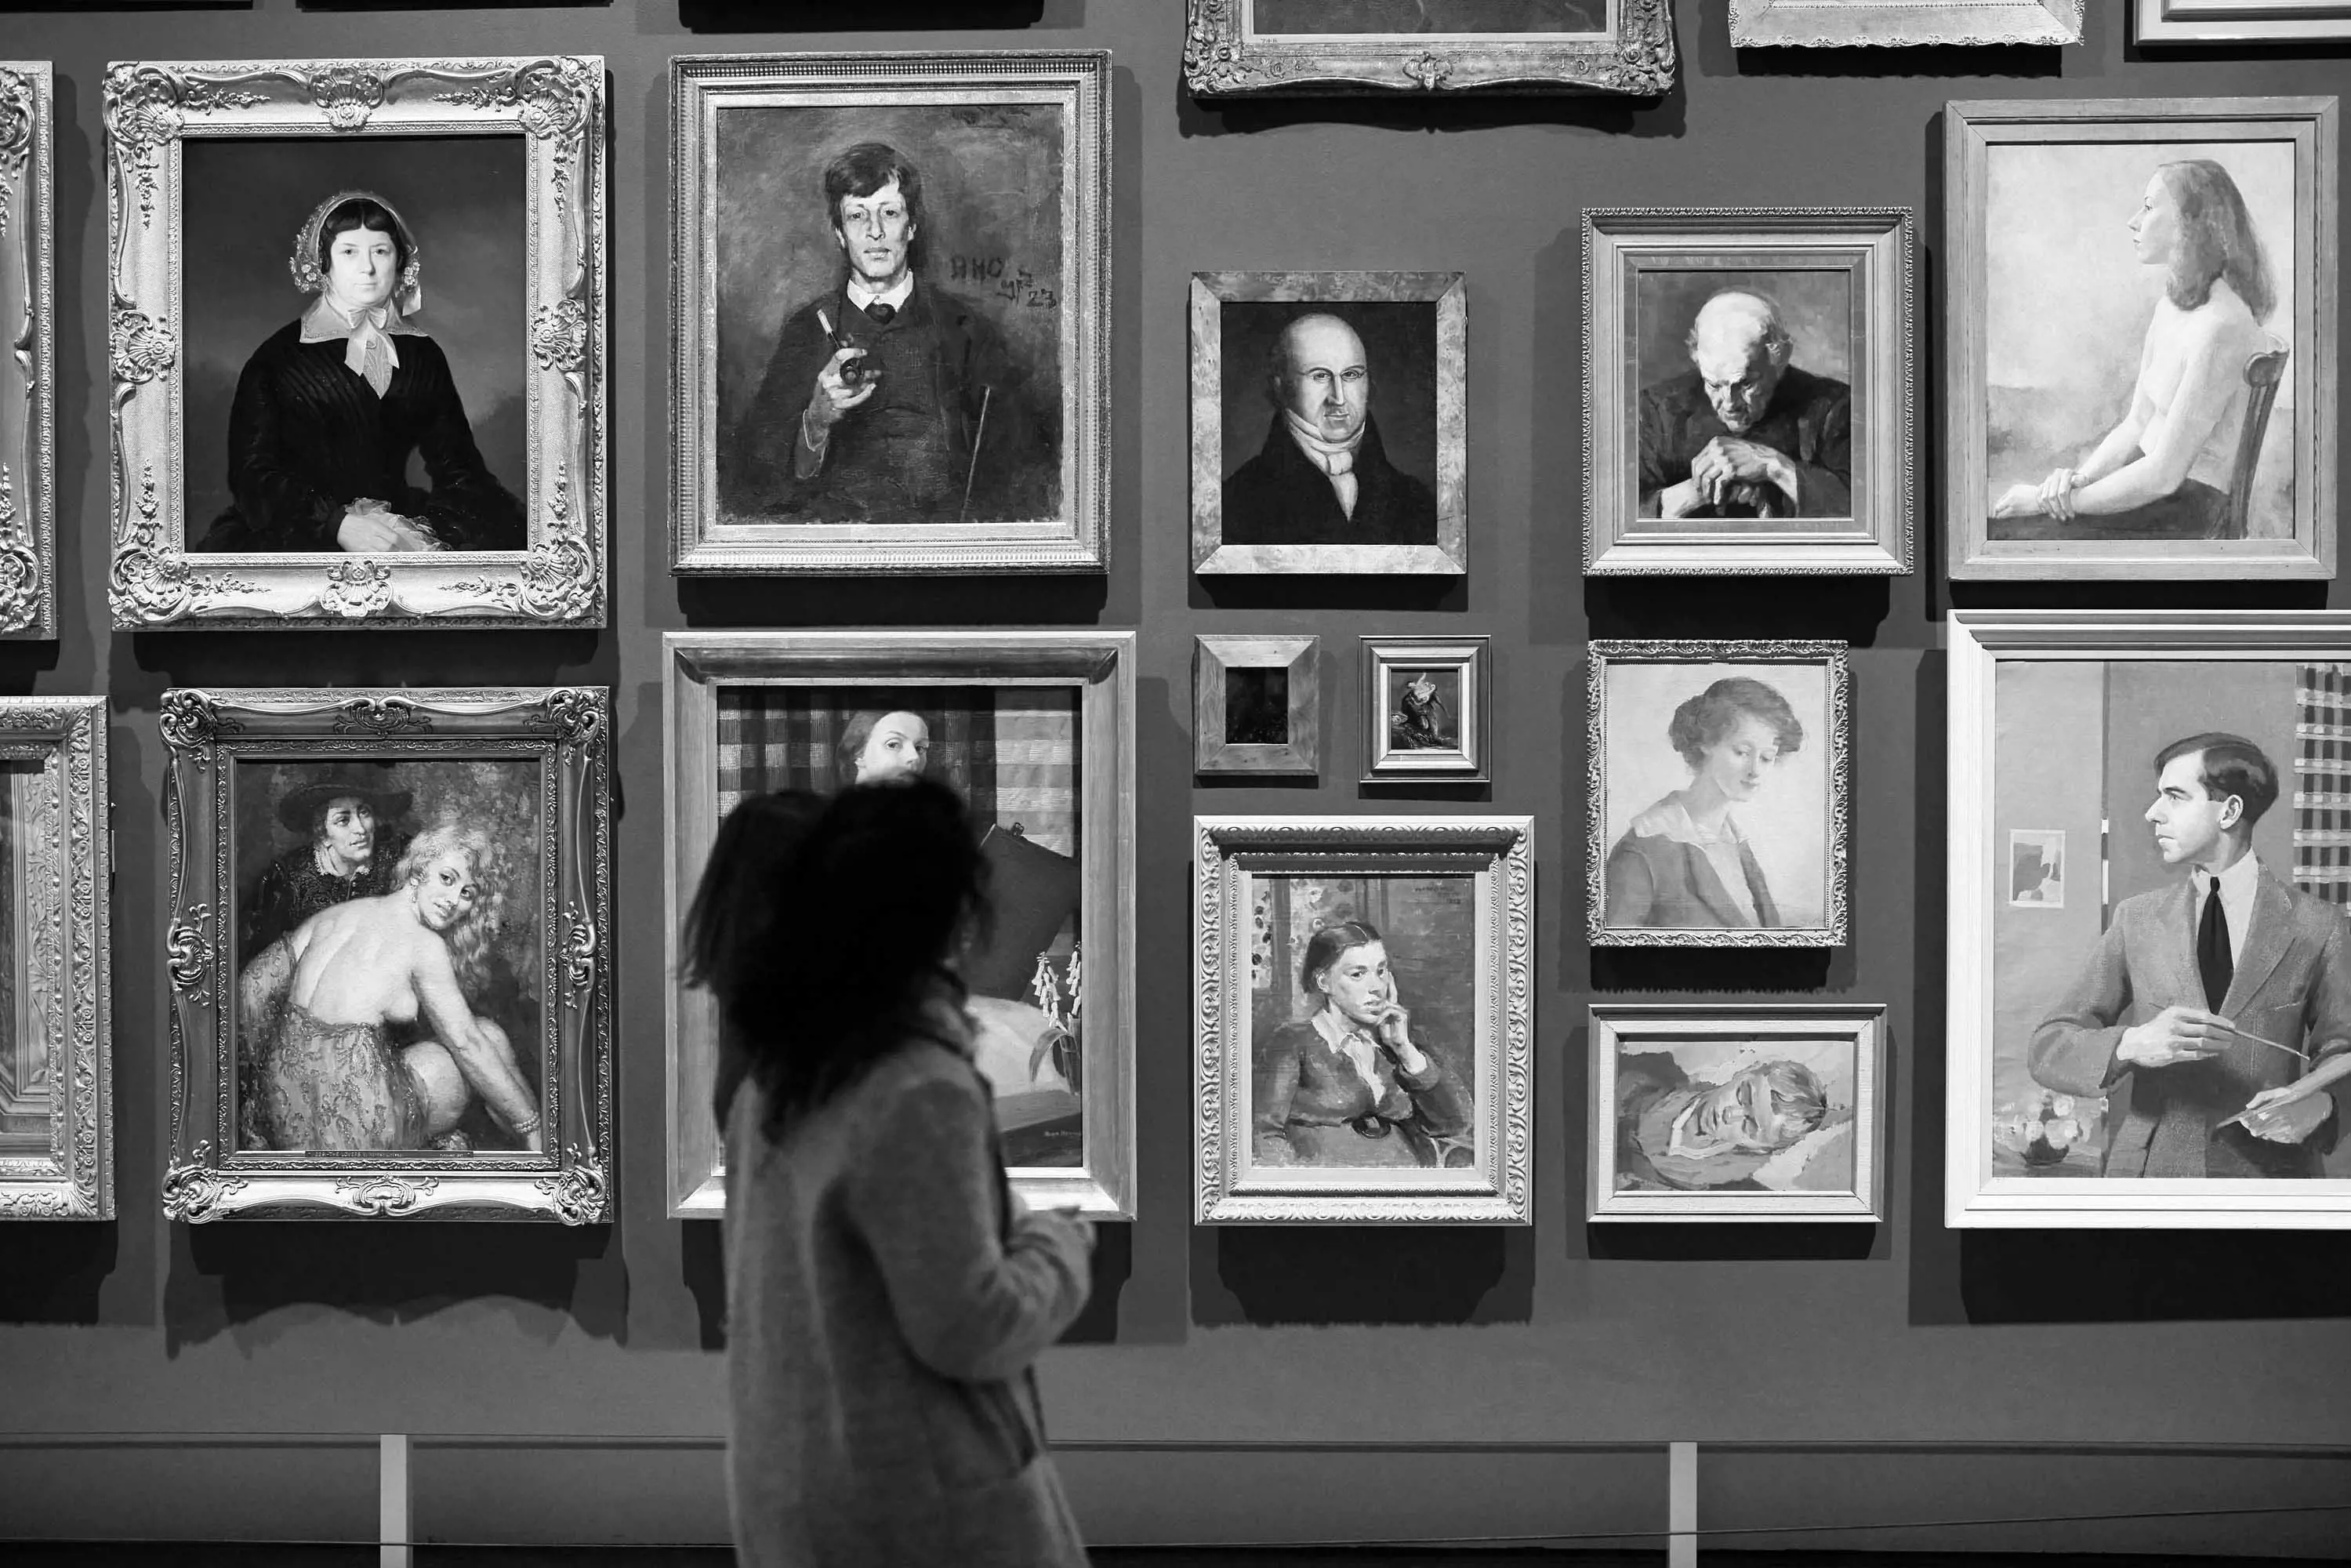 A woman walks by a tall wall with an arrangement of portrait paintings in various sizes with lavish frames. 